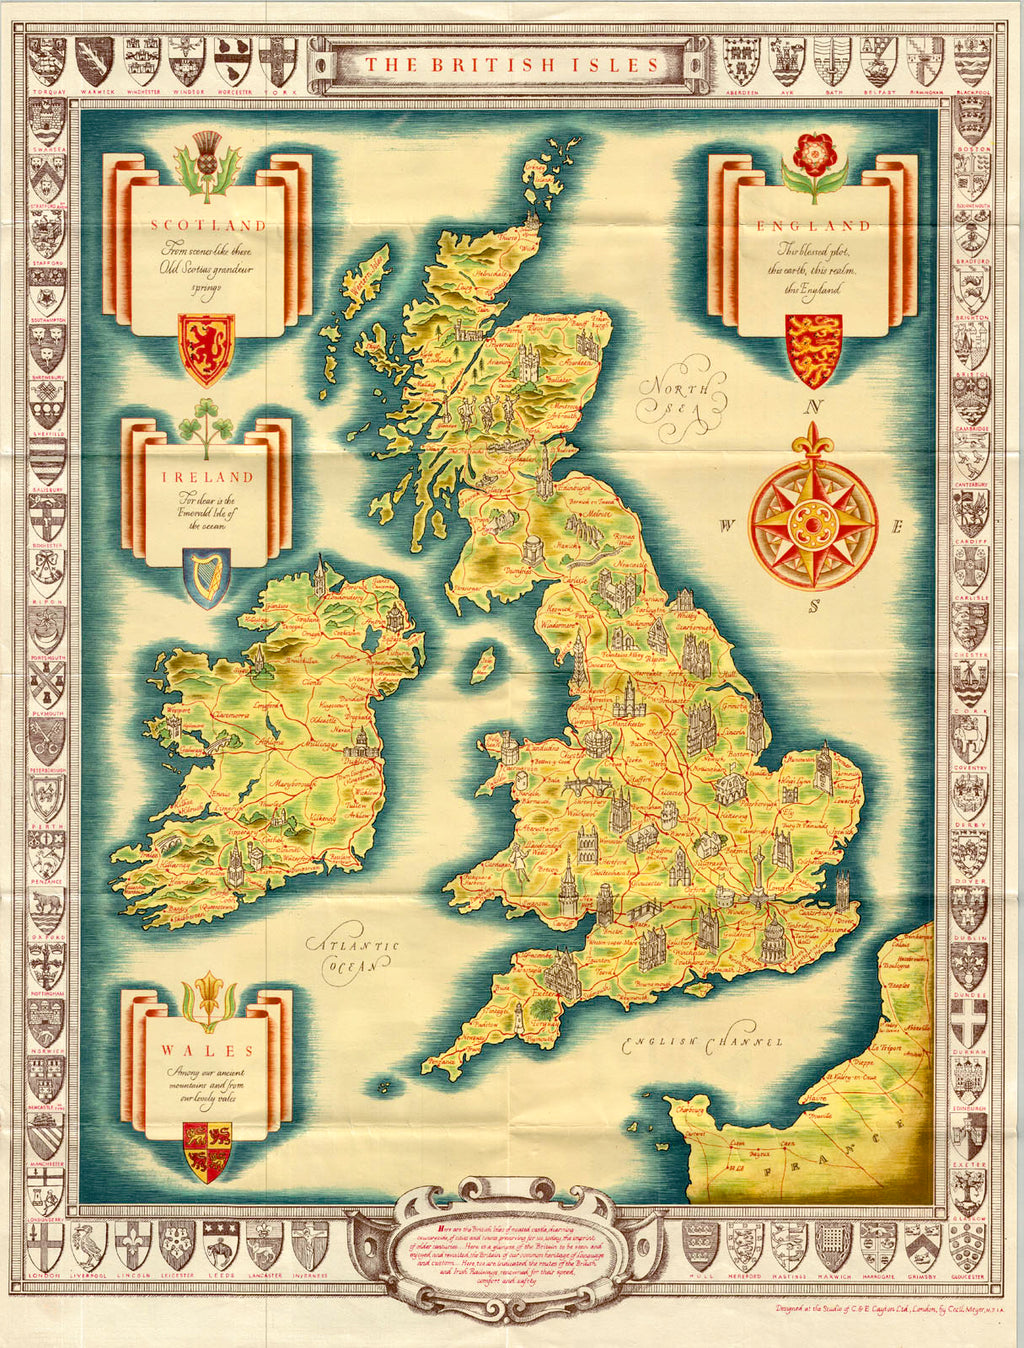 (Britain) The British Isles, C & E Layton, c. 1935 A beautiful, subtle pictorial map of Britain showing the rail routes that can get you to the countryside and heritage of the lands. Small architectural vignettes note cathedrals and monuments from Plymouth to John o' Groats in Scotland, from Westport in Ireland to the Cathedral of Canterbury